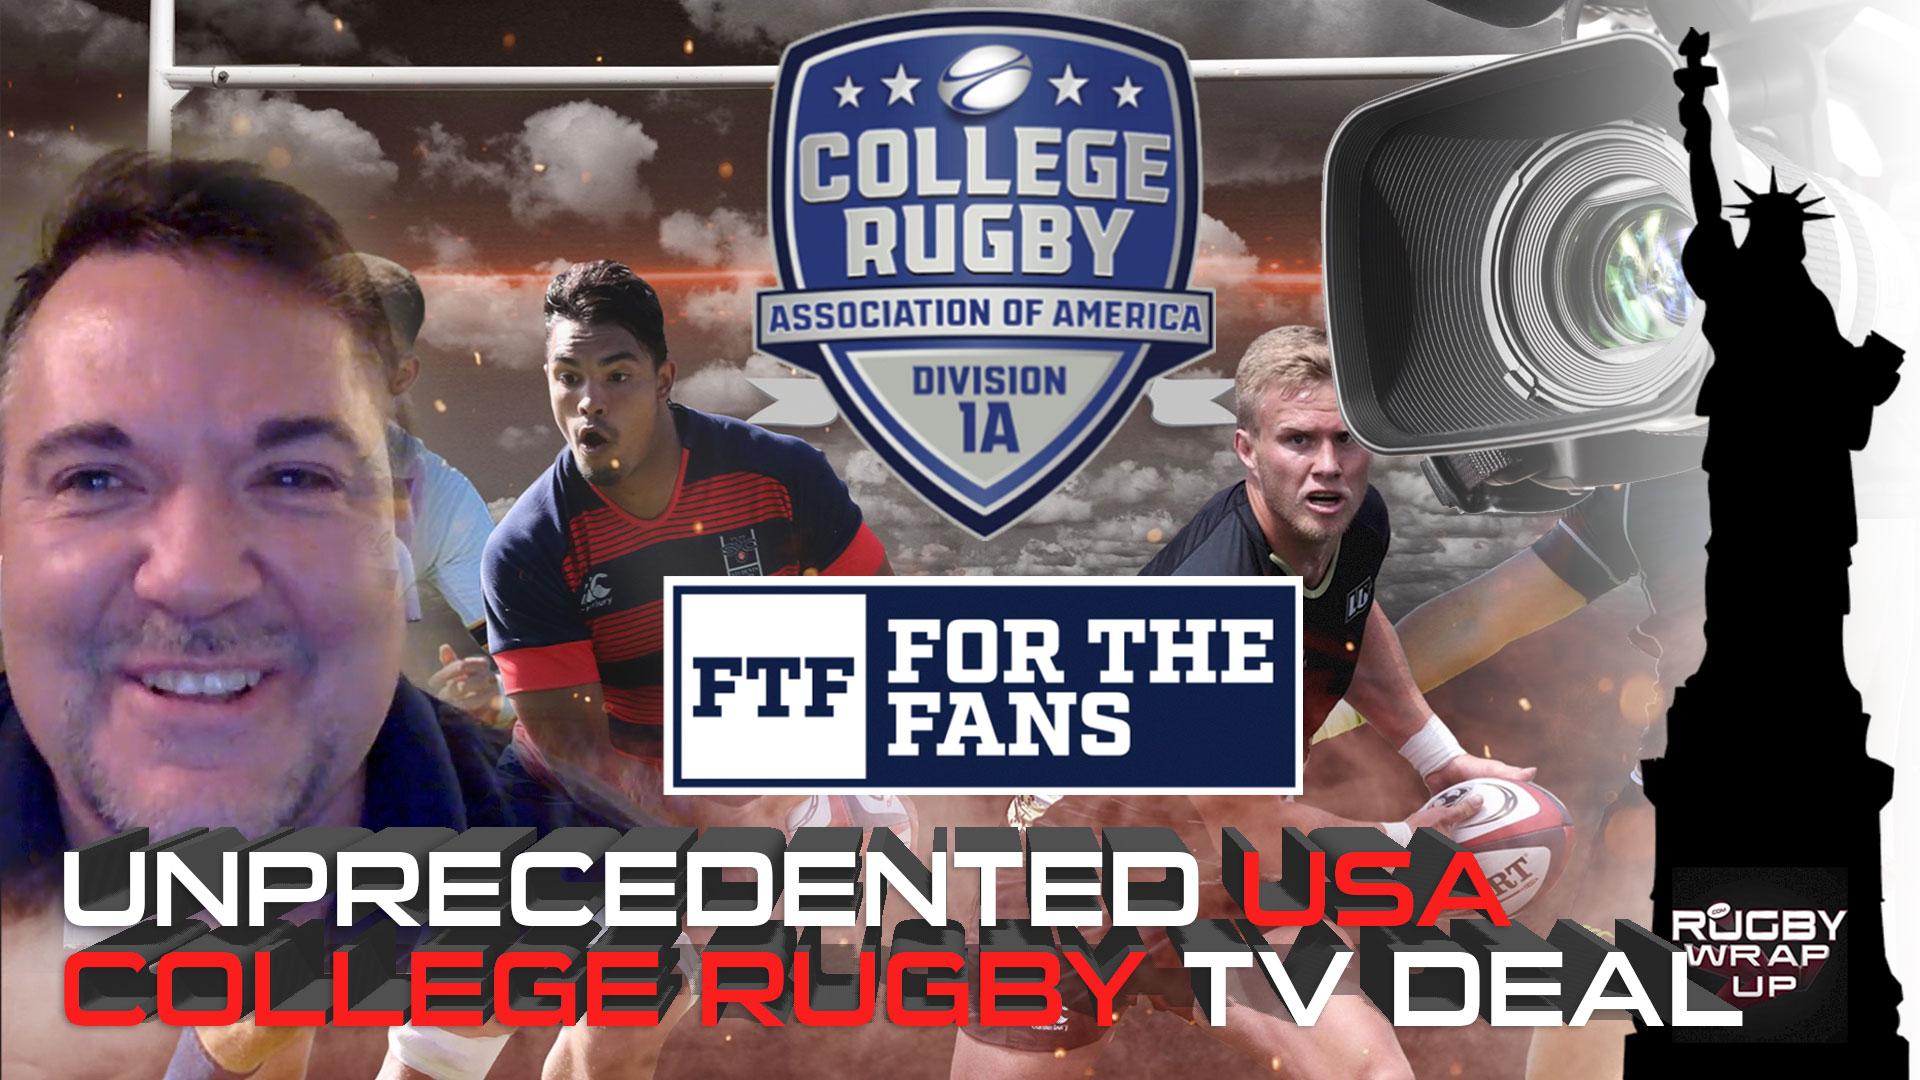 Paul Keeler re D1A Rugby TV Deal, Steve Lewis re USA Rugby Crisis, Storied #NY7s Recap, #Dubai7s